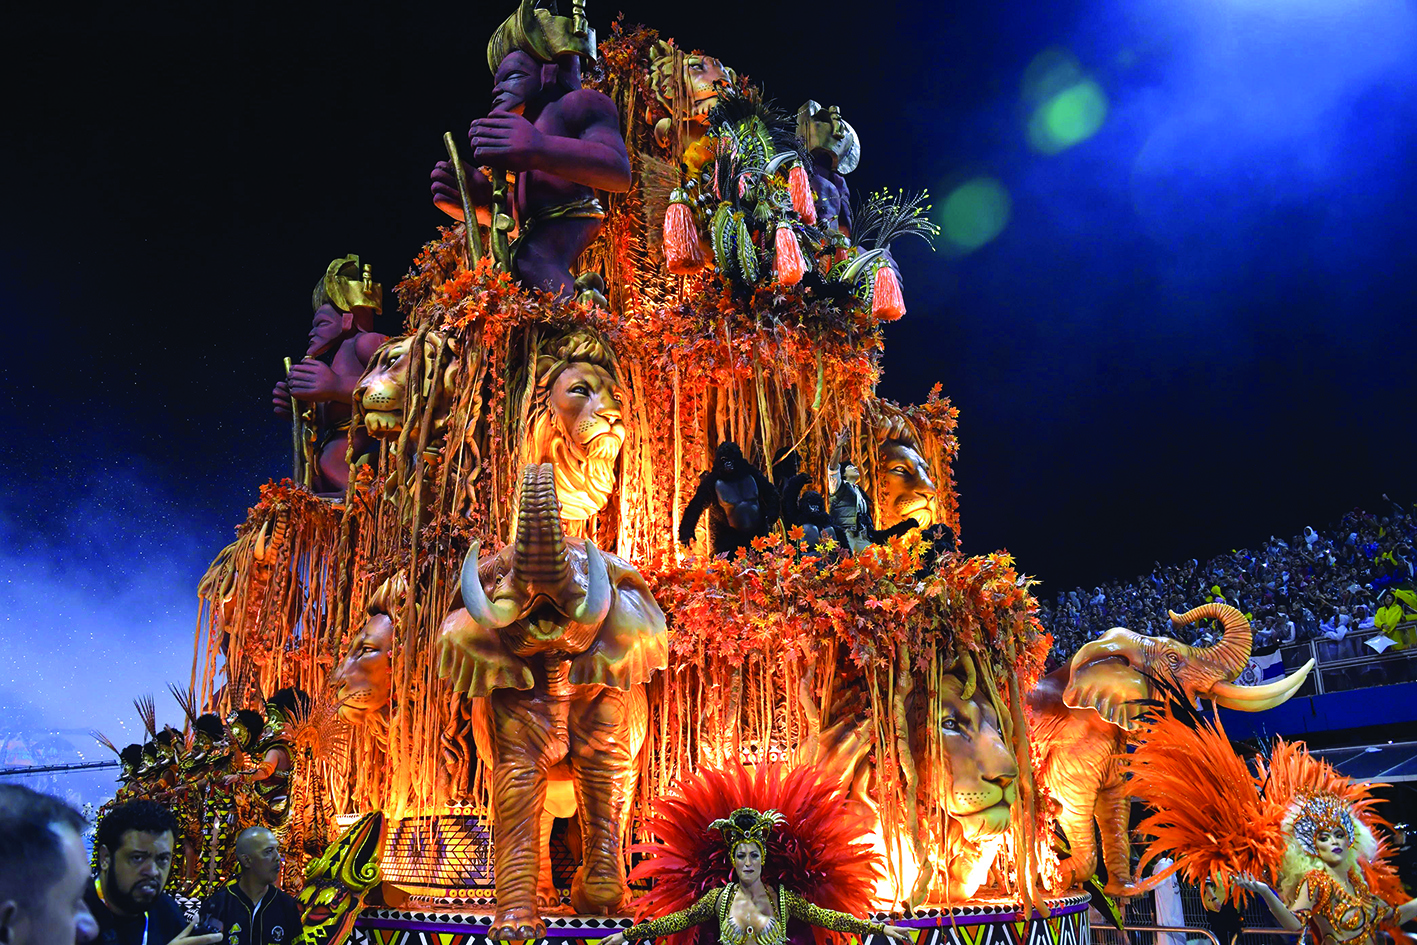 Revellers of the Gavioes da Fiel samba school perform during the second night of carnival in Sao Paulo, Brazil, at the city's Sambadrome early on February 23, 2020. (Photo by NELSON ALMEIDA / AFP)